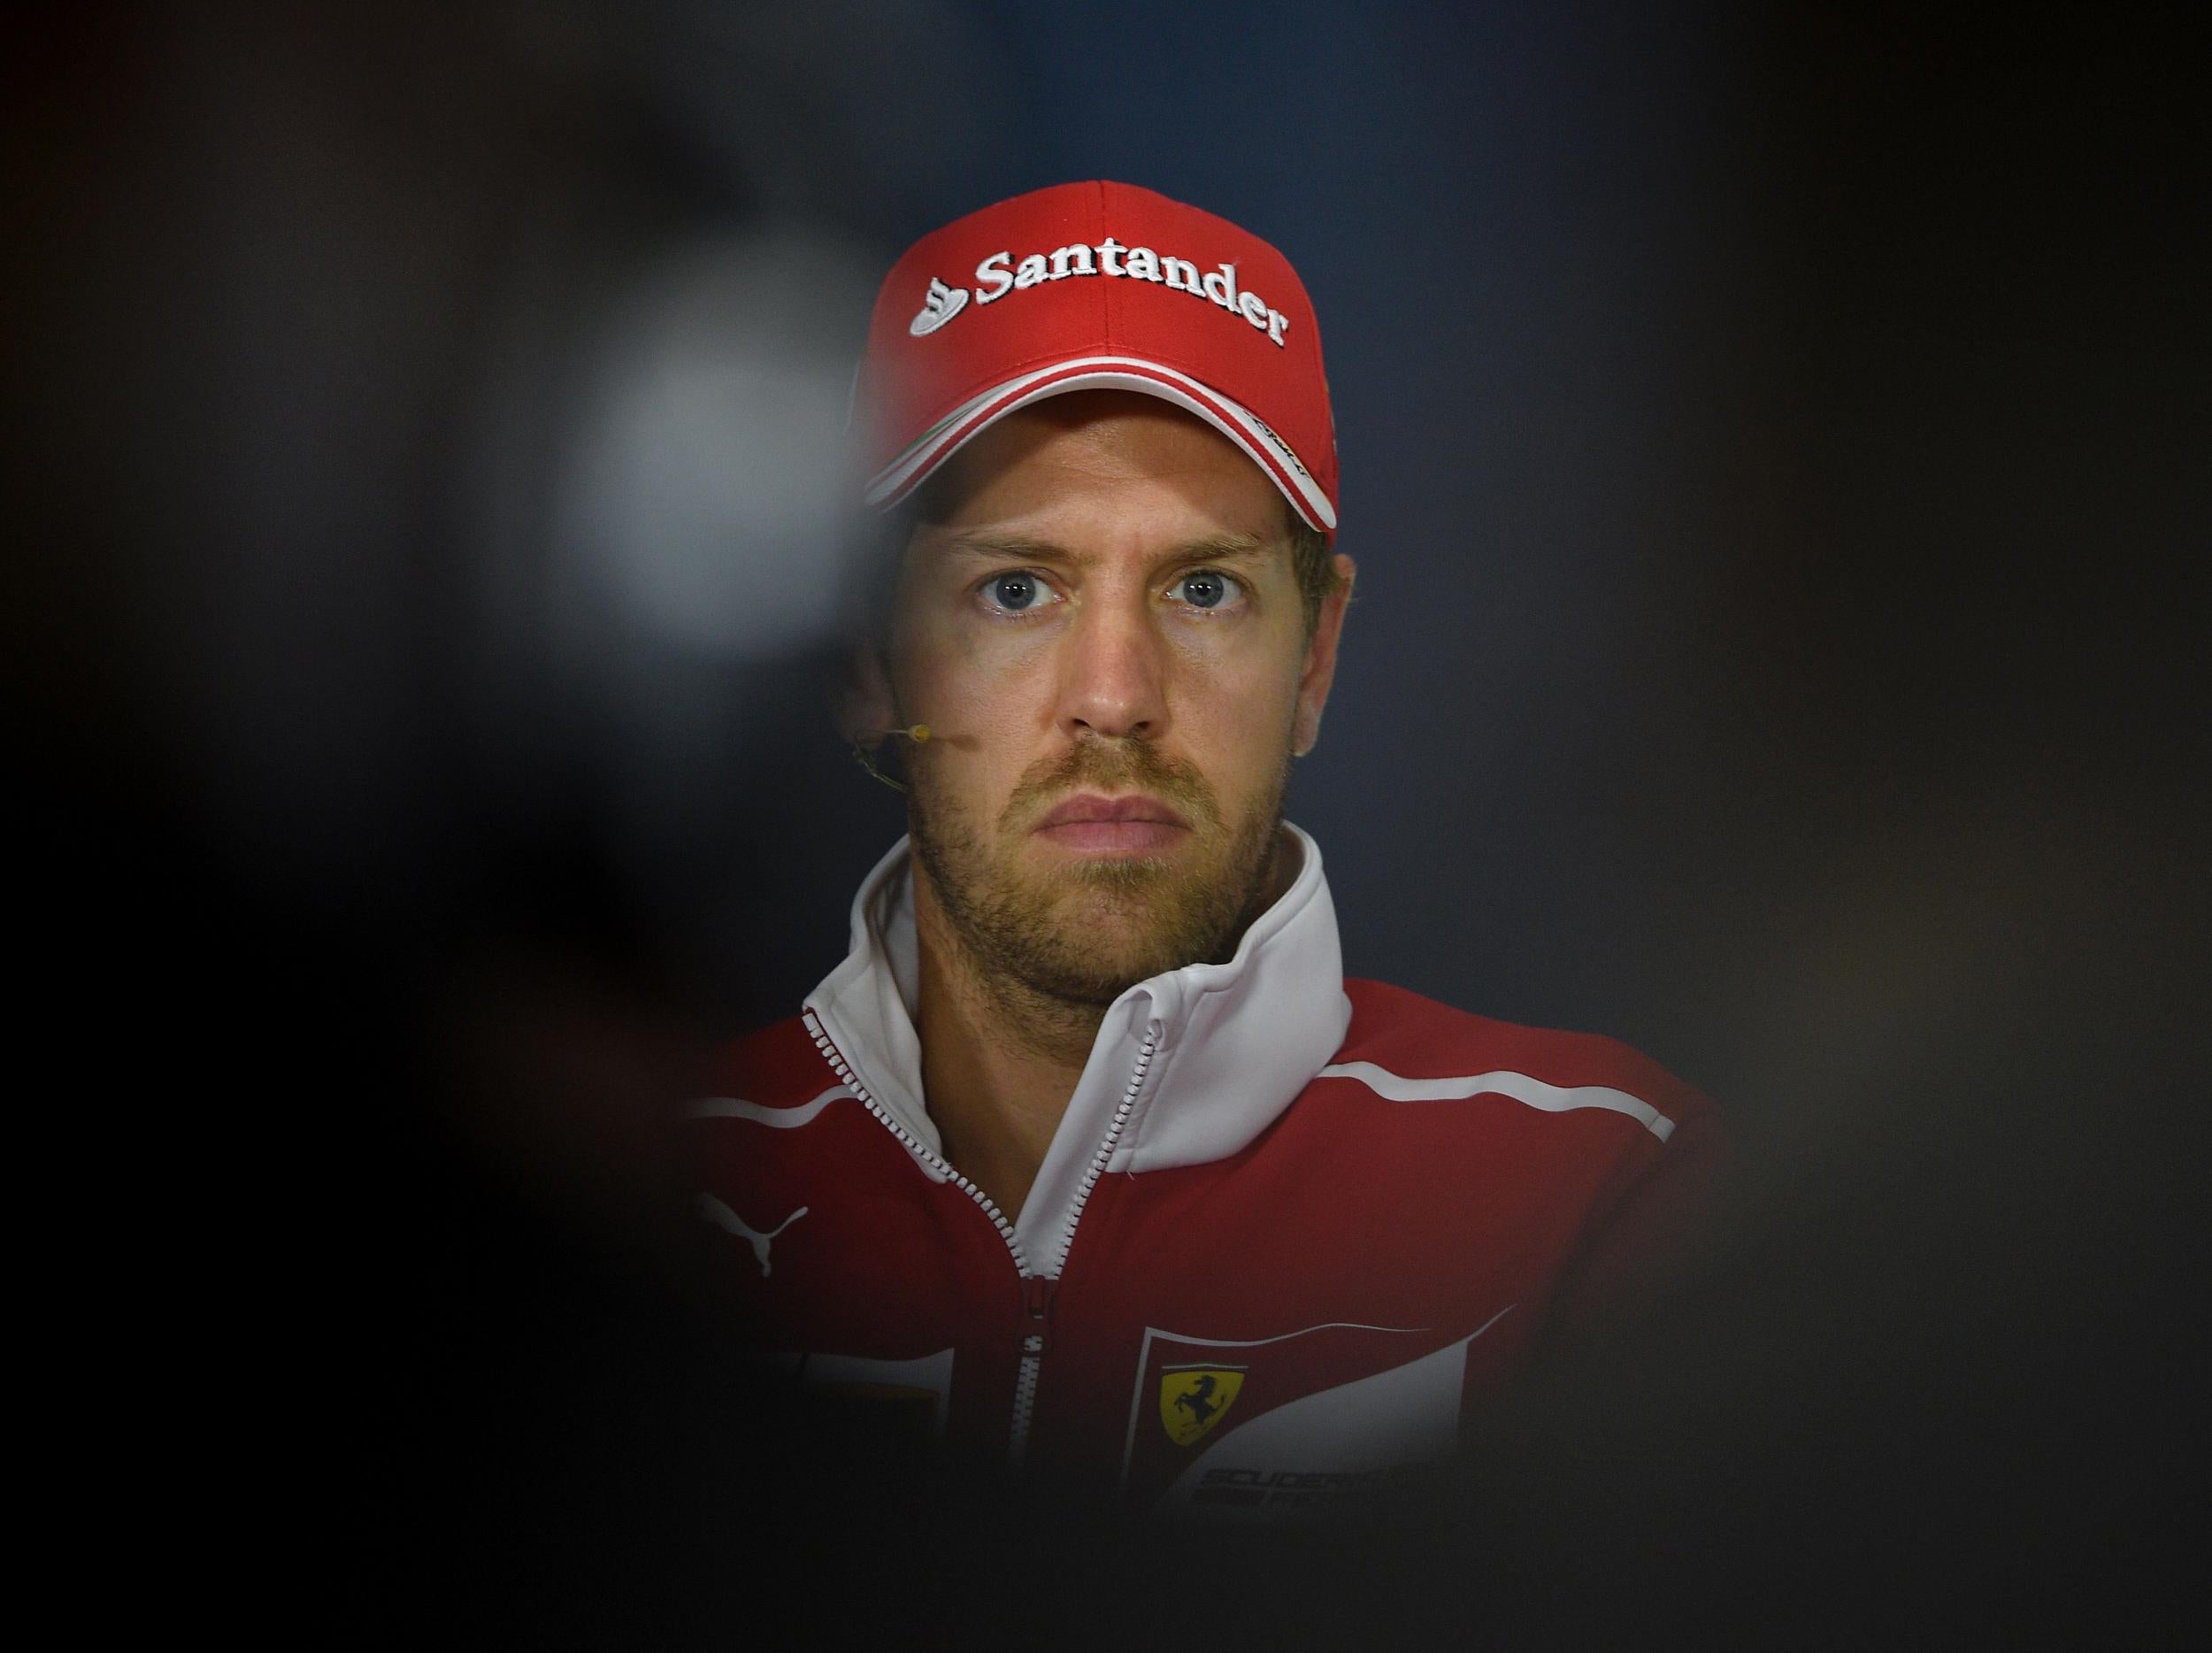 There has been speculation that Vettel could quit Ferrari